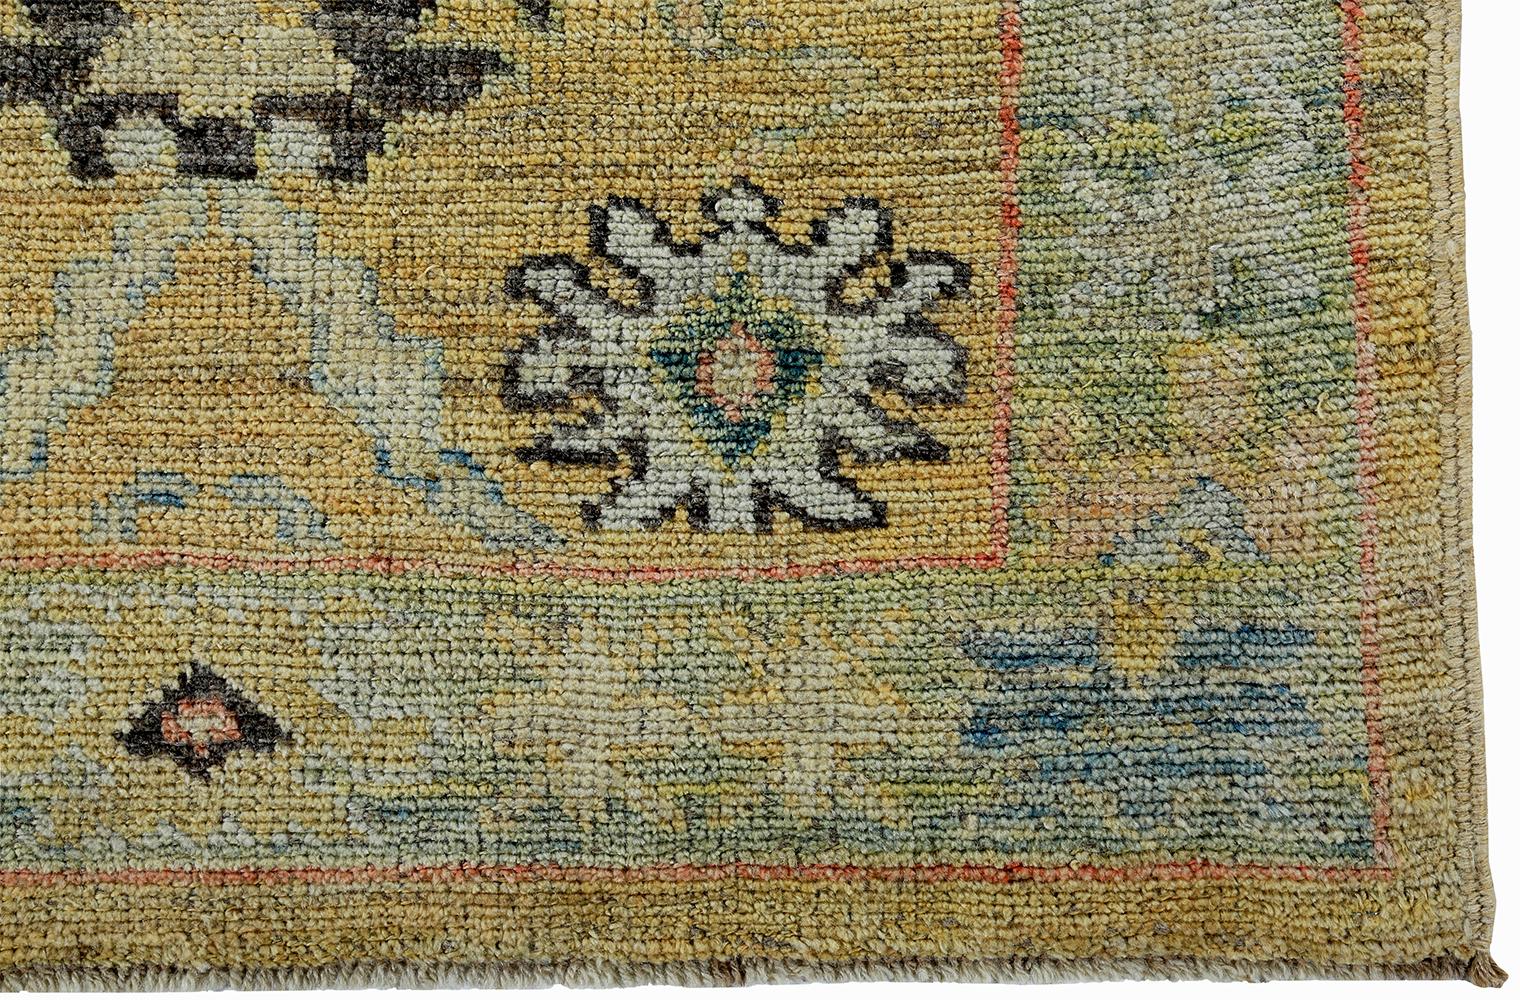 Amazing Earth Tone Modern Turkish Oushak Runner Rug / Country of Origin: Turkey, Circa Date: Modern - Size: 3 ft 2 in x 18 ft 7 in (0.97 m x 5.66 m).